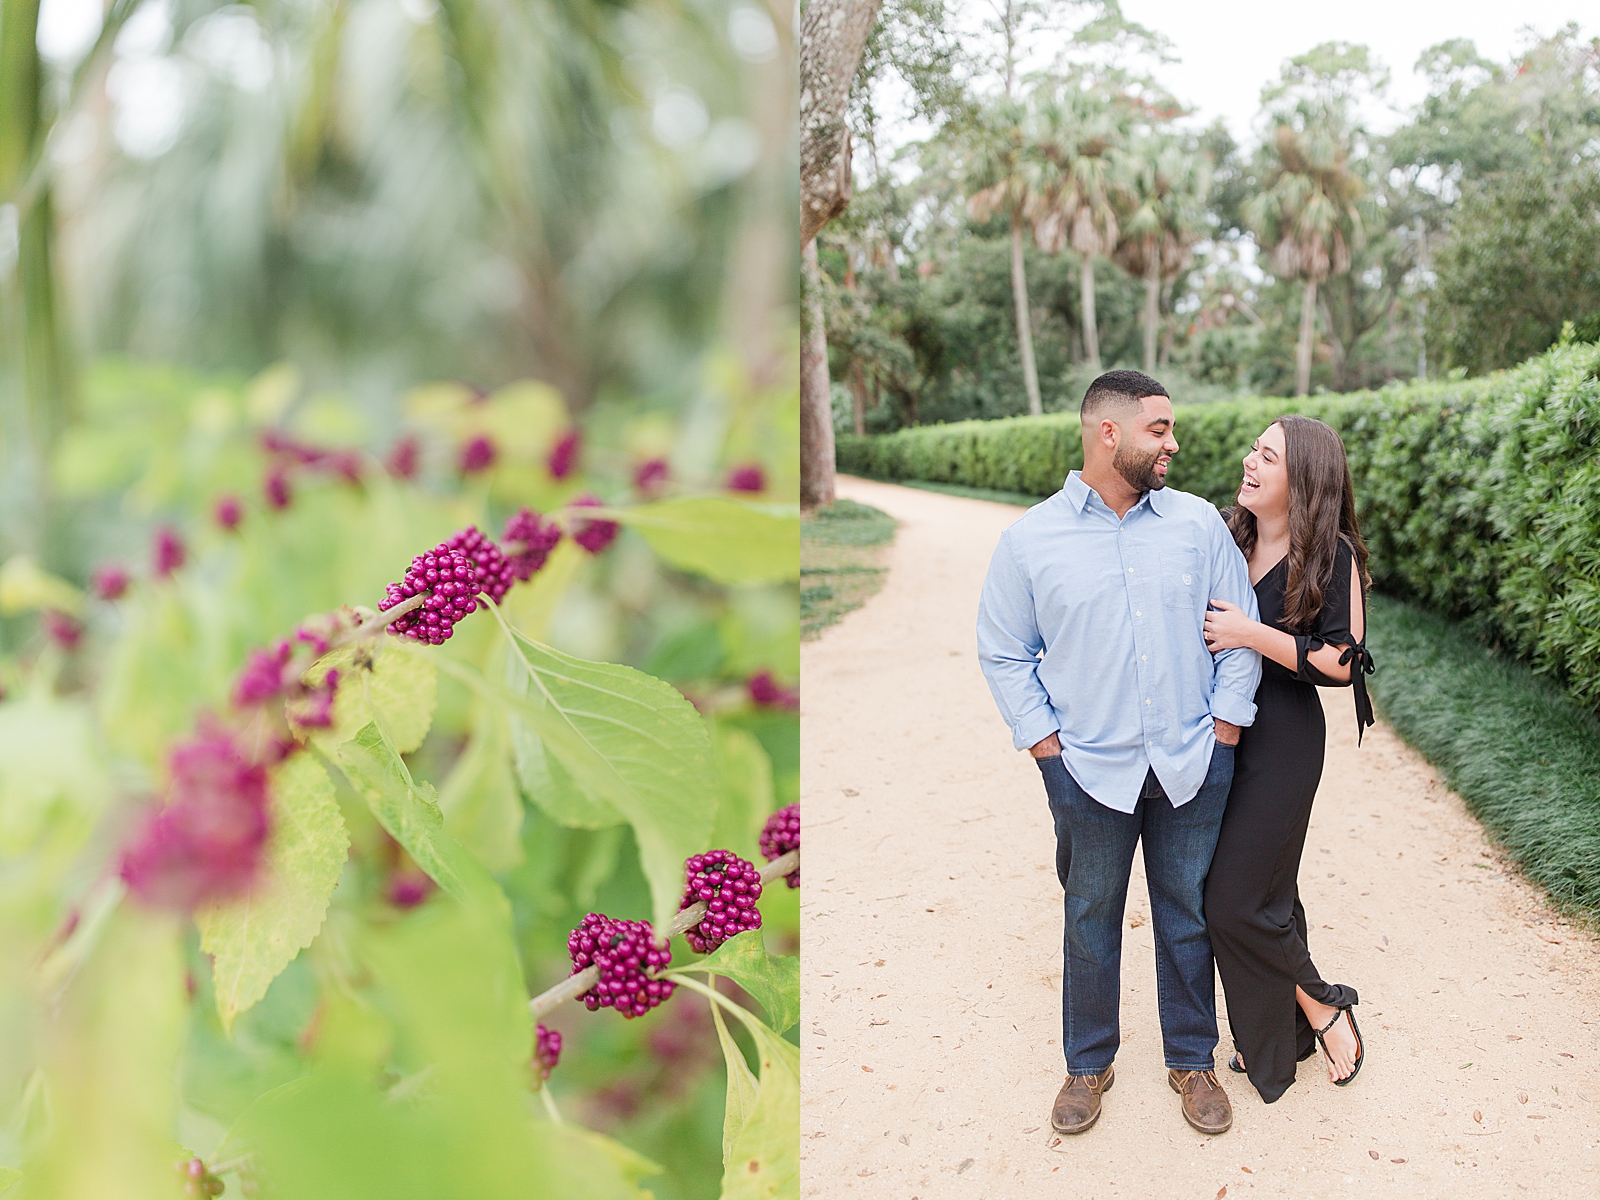 St. Augustine Engagement Greenery detail and Nick and Chloe smiling at each other Photos